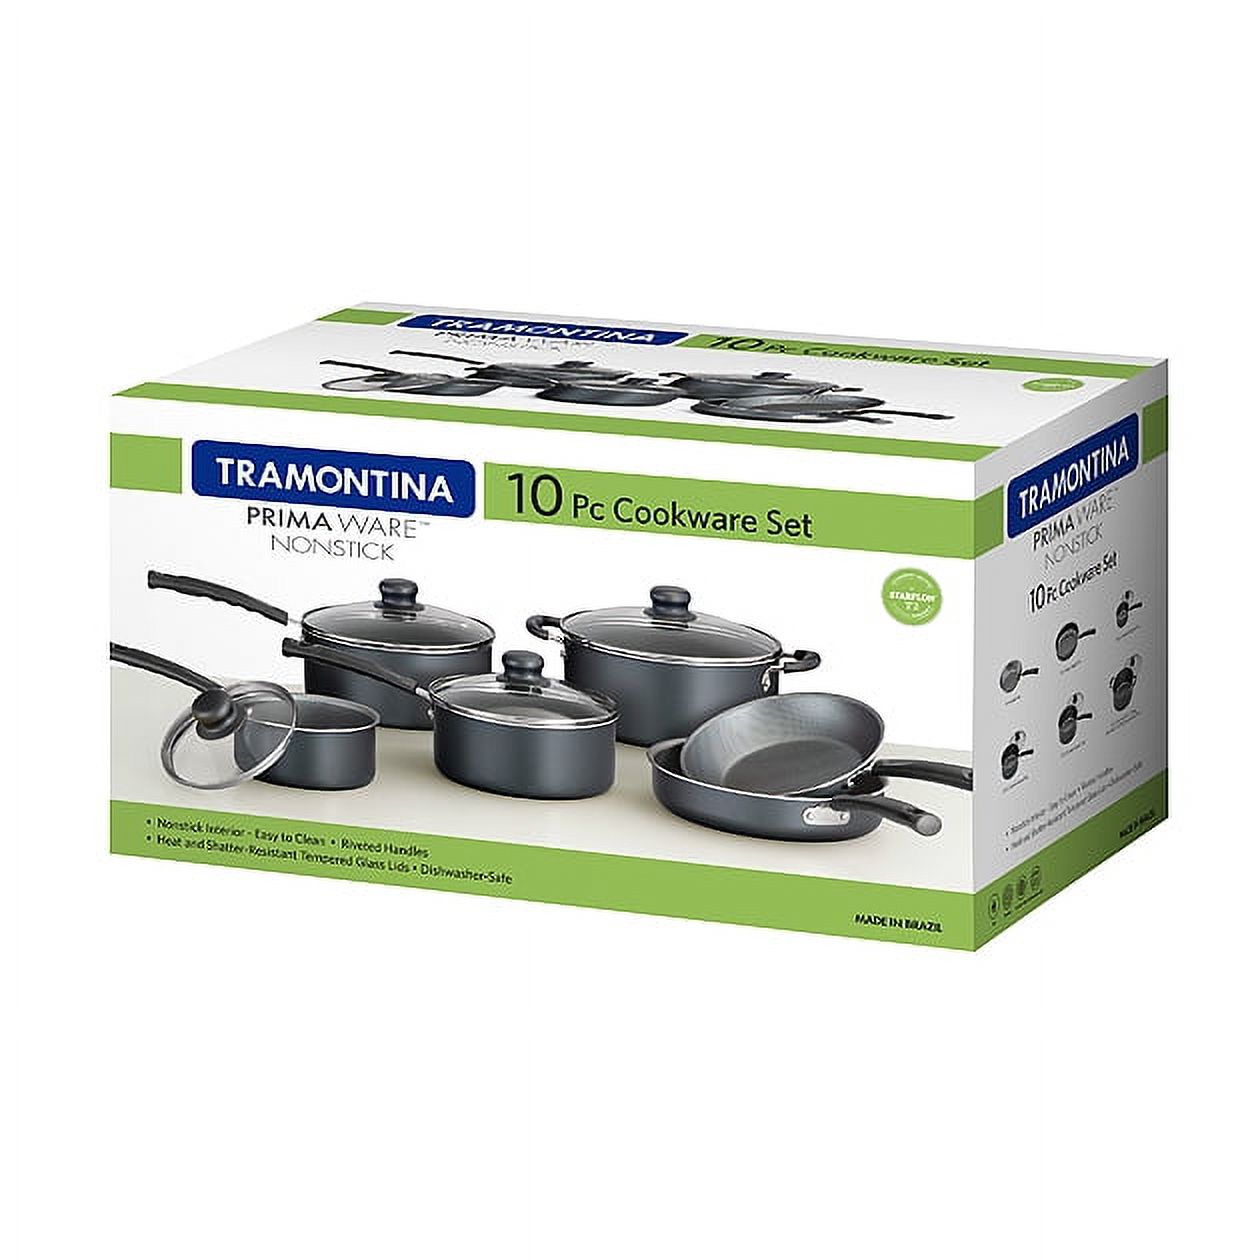 Tramontina Primaware Non-stick Cookware Set, 10 Piece - image 2 of 7